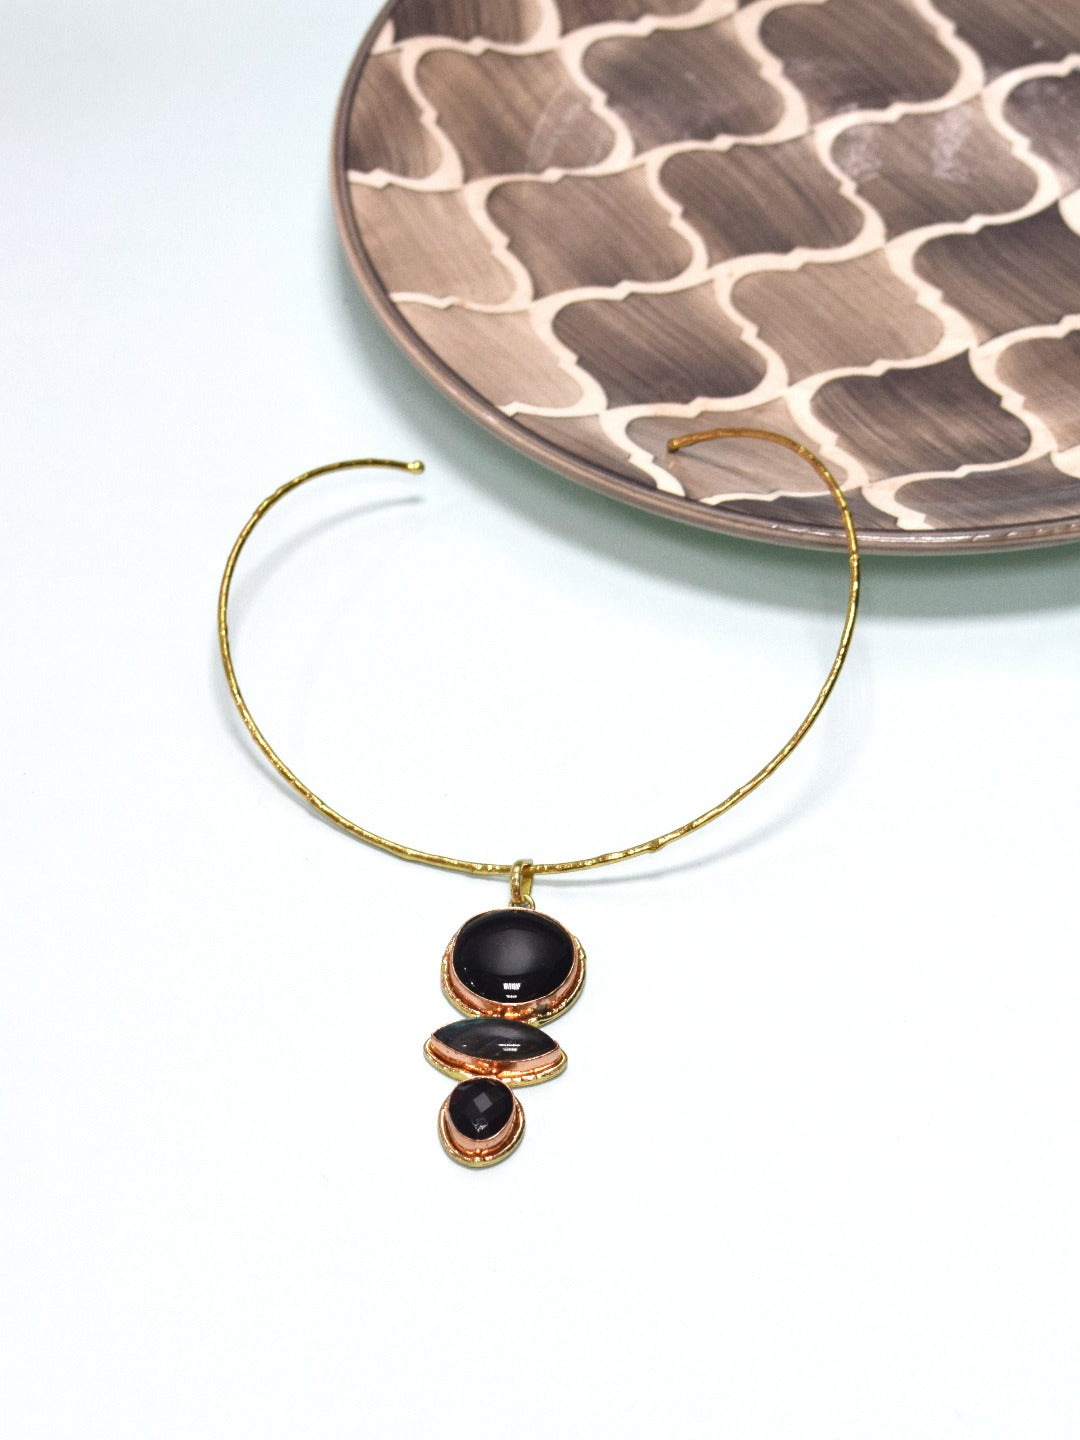 2 Layer Onyx Necklace with Fancy Spacers